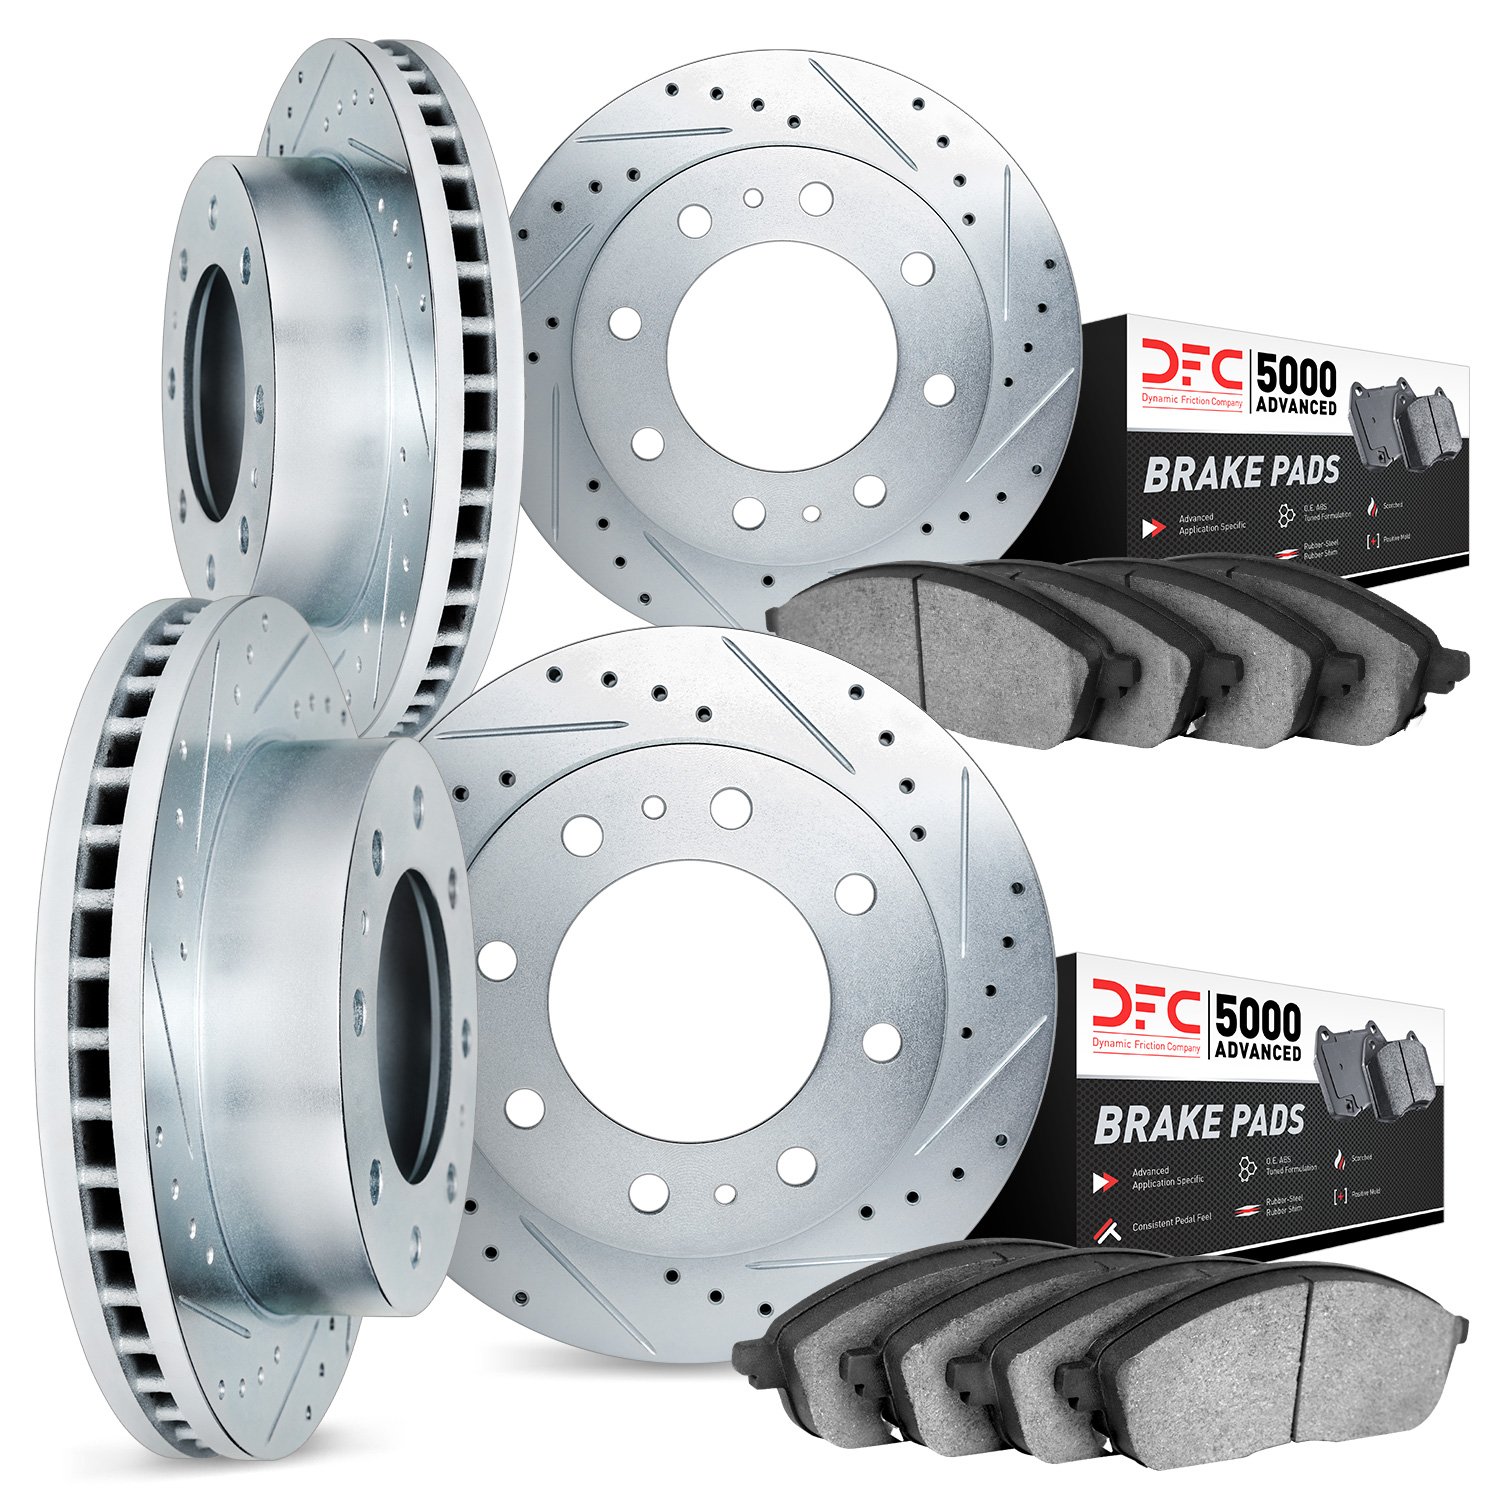 7504-54338 Drilled/Slotted Brake Rotors w/5000 Advanced Brake Pads Kit [Silver], 1999-2005 Ford/Lincoln/Mercury/Mazda, Position: